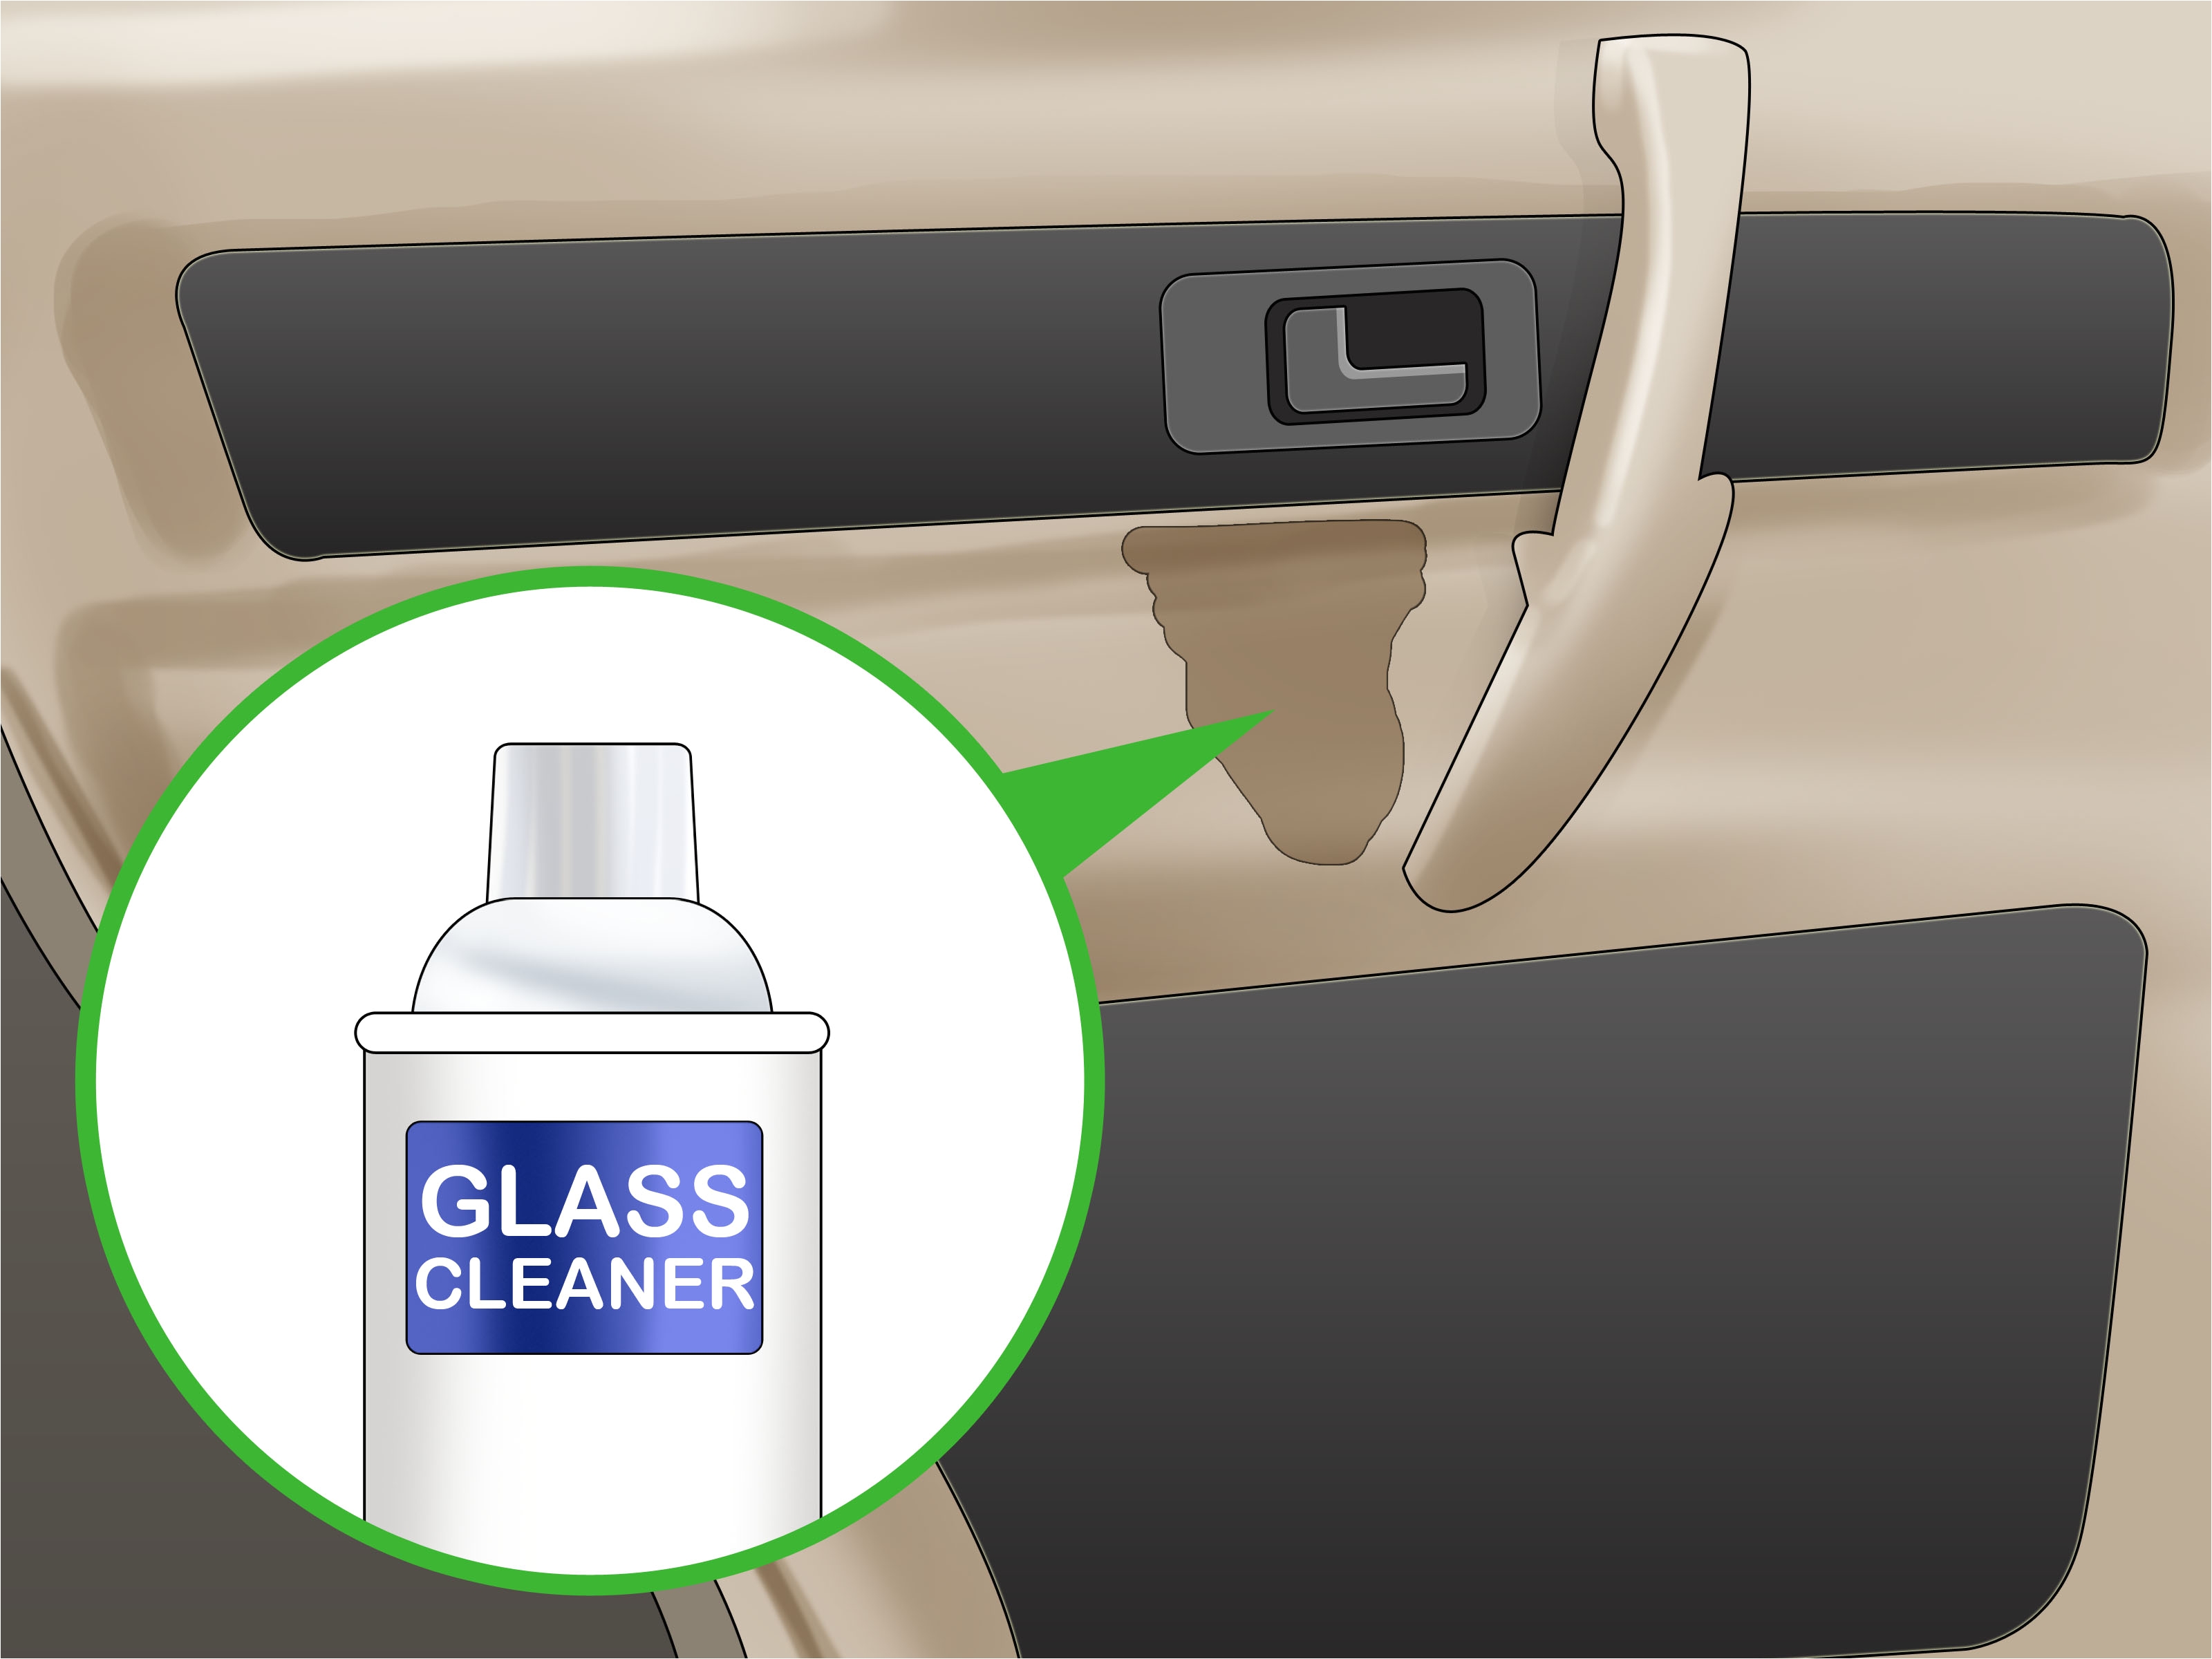 remove soda stains from a car s interior step 19 version 2 jpg